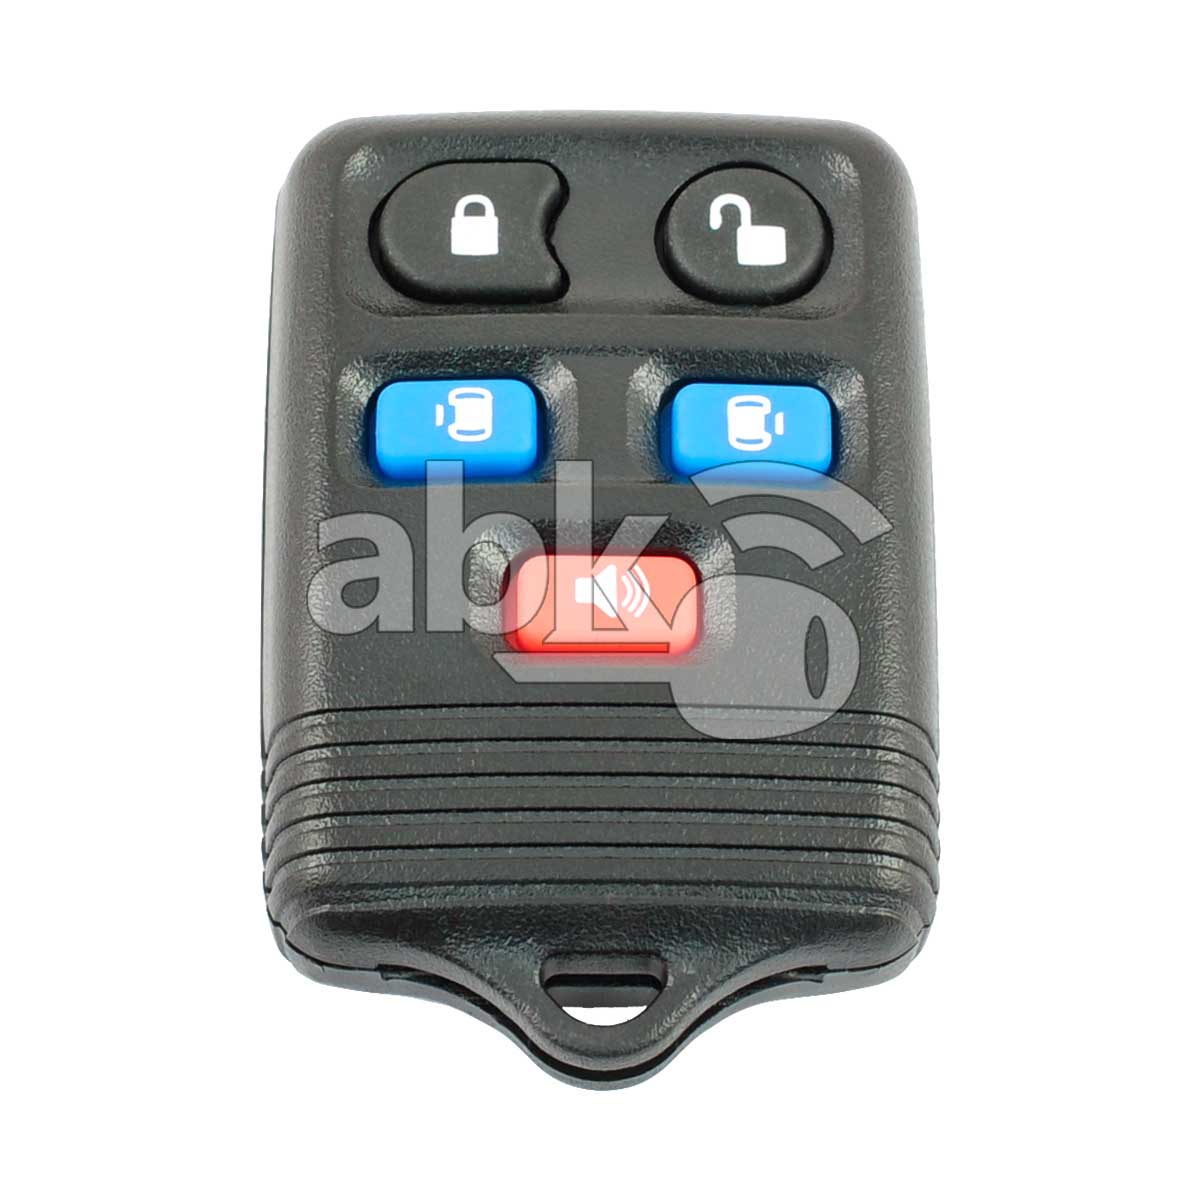 Ford 1999+ Remote Control Cover 5Buttons - ABK-2306 - ABKEYS.COM